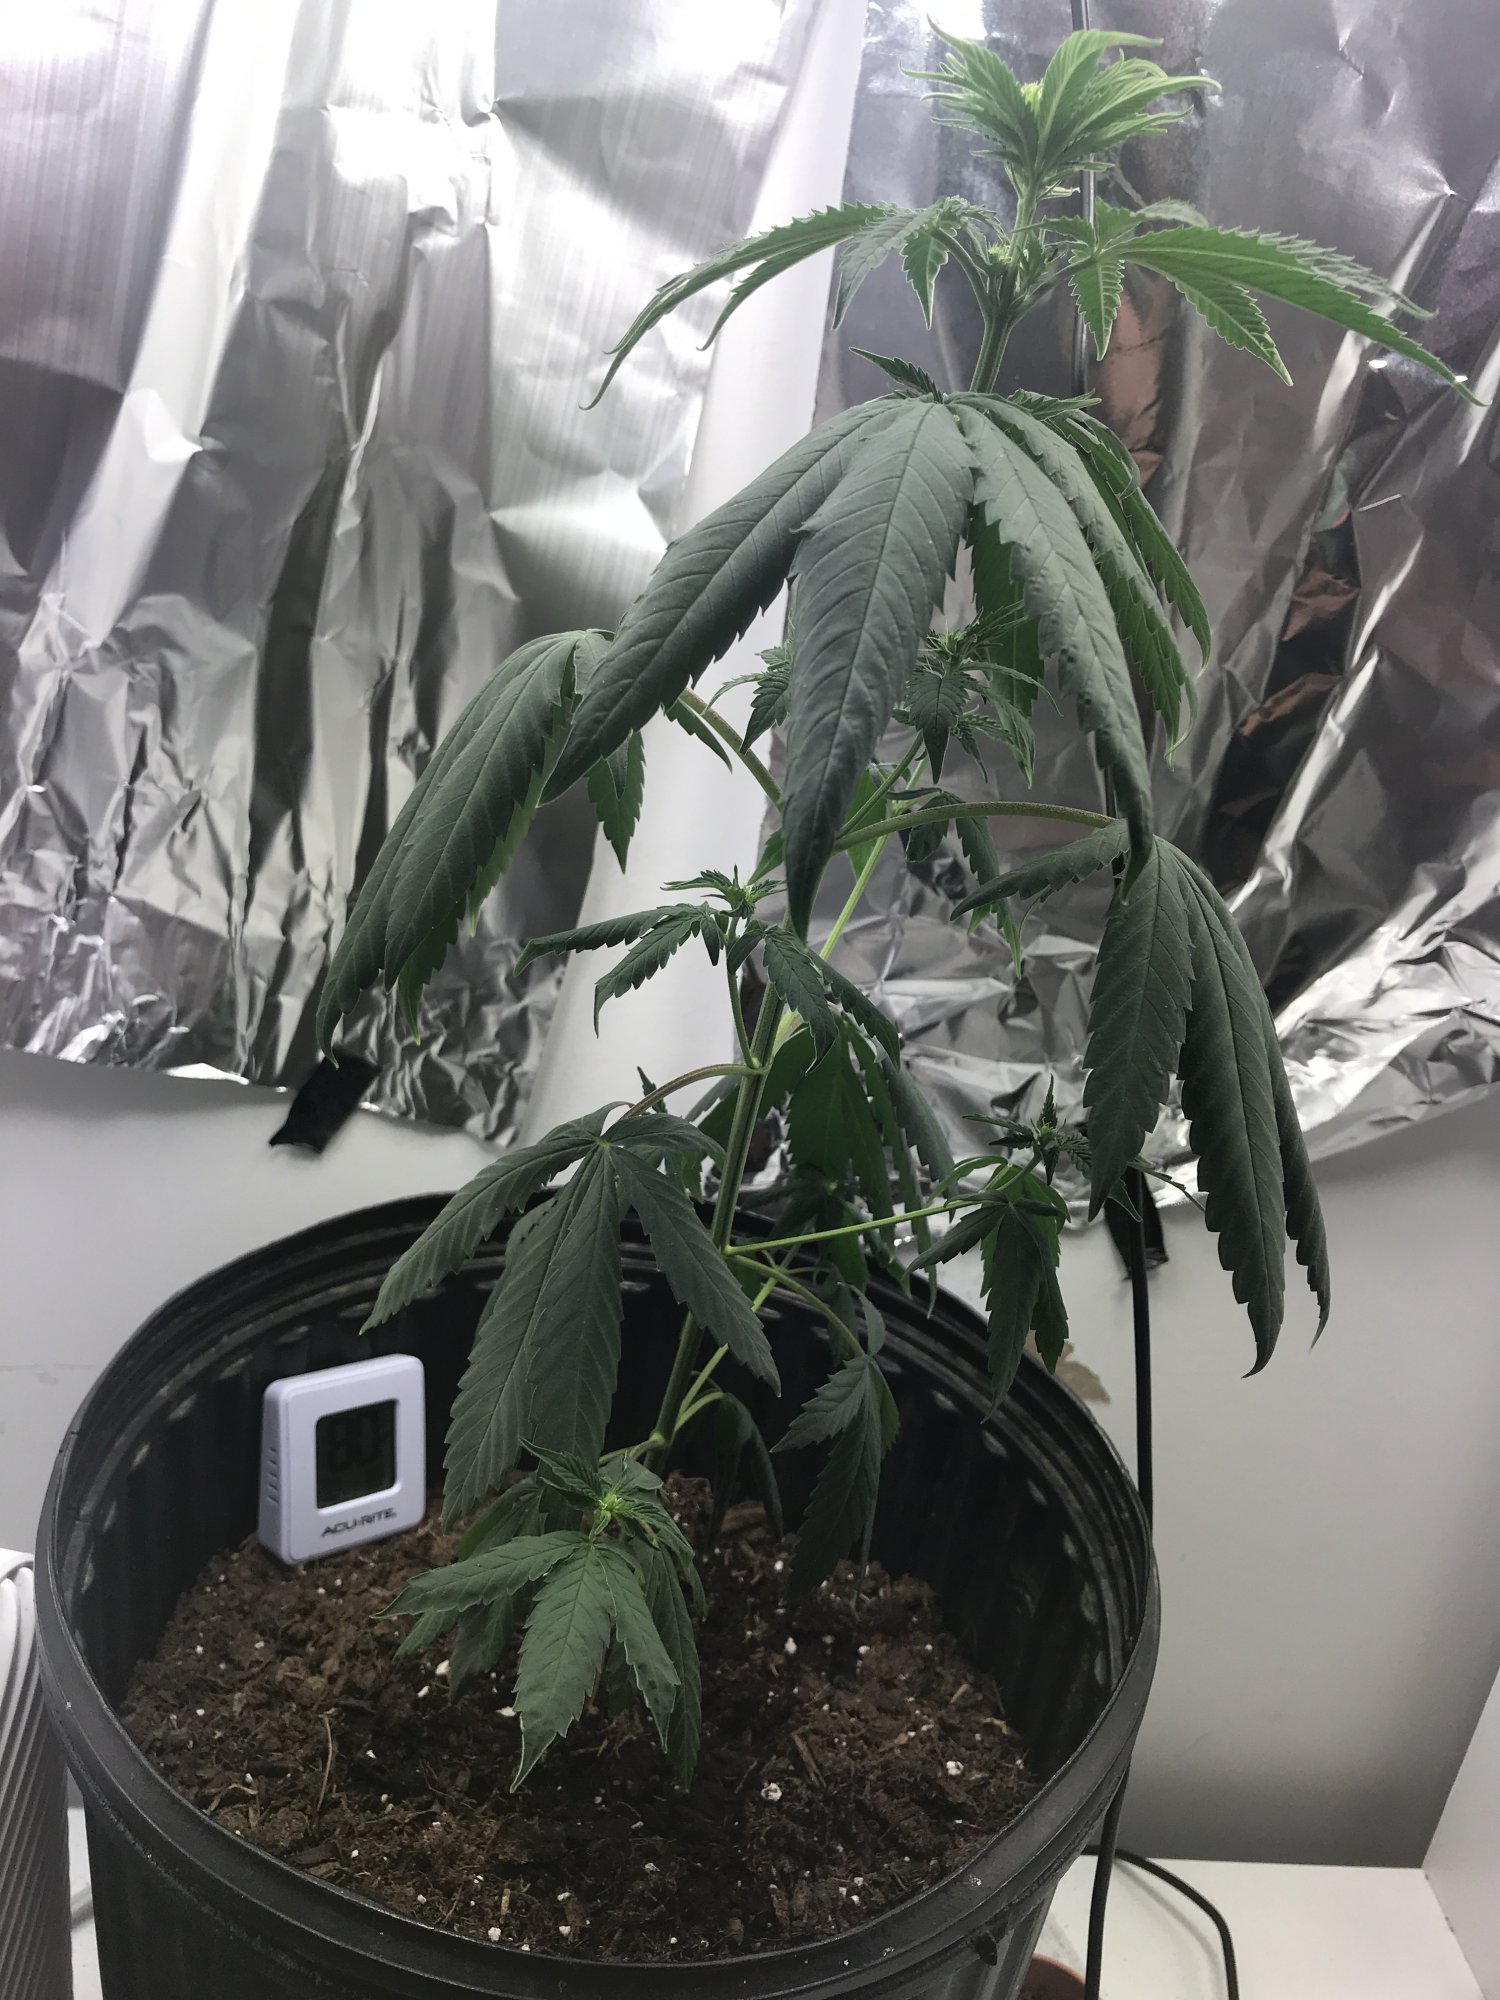 Could this be overwatering 2